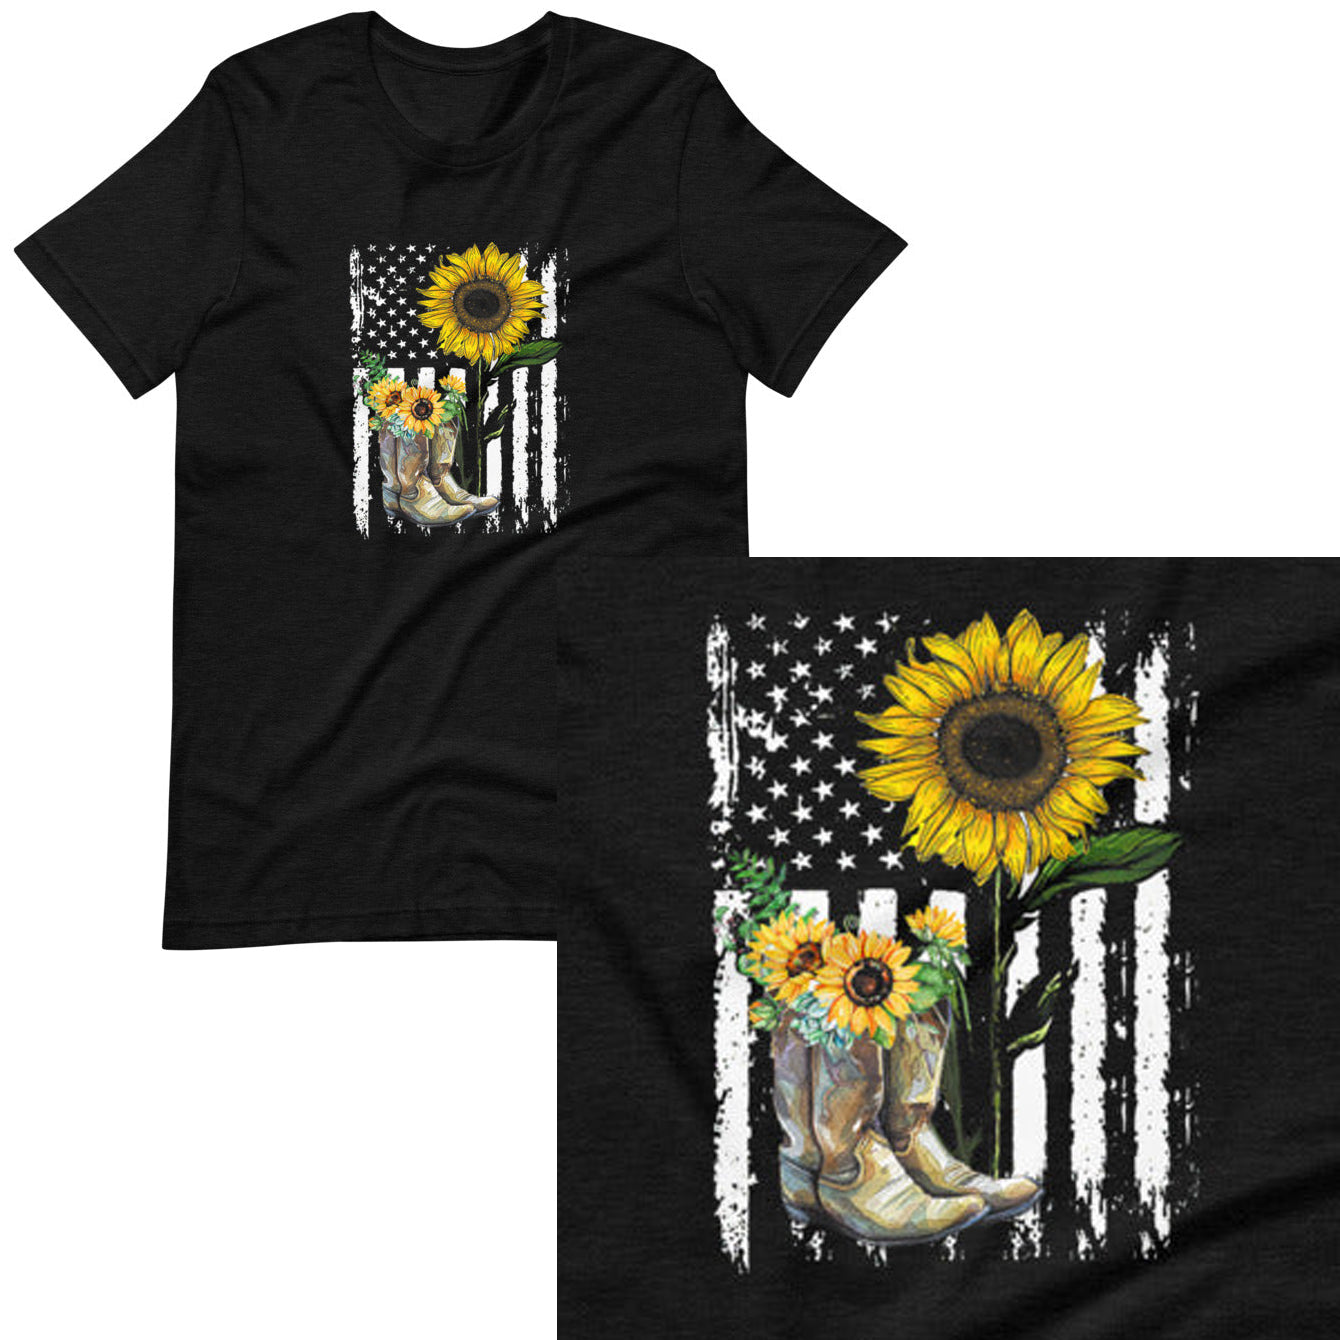 Boots, Flag and Sunflower T-shirt